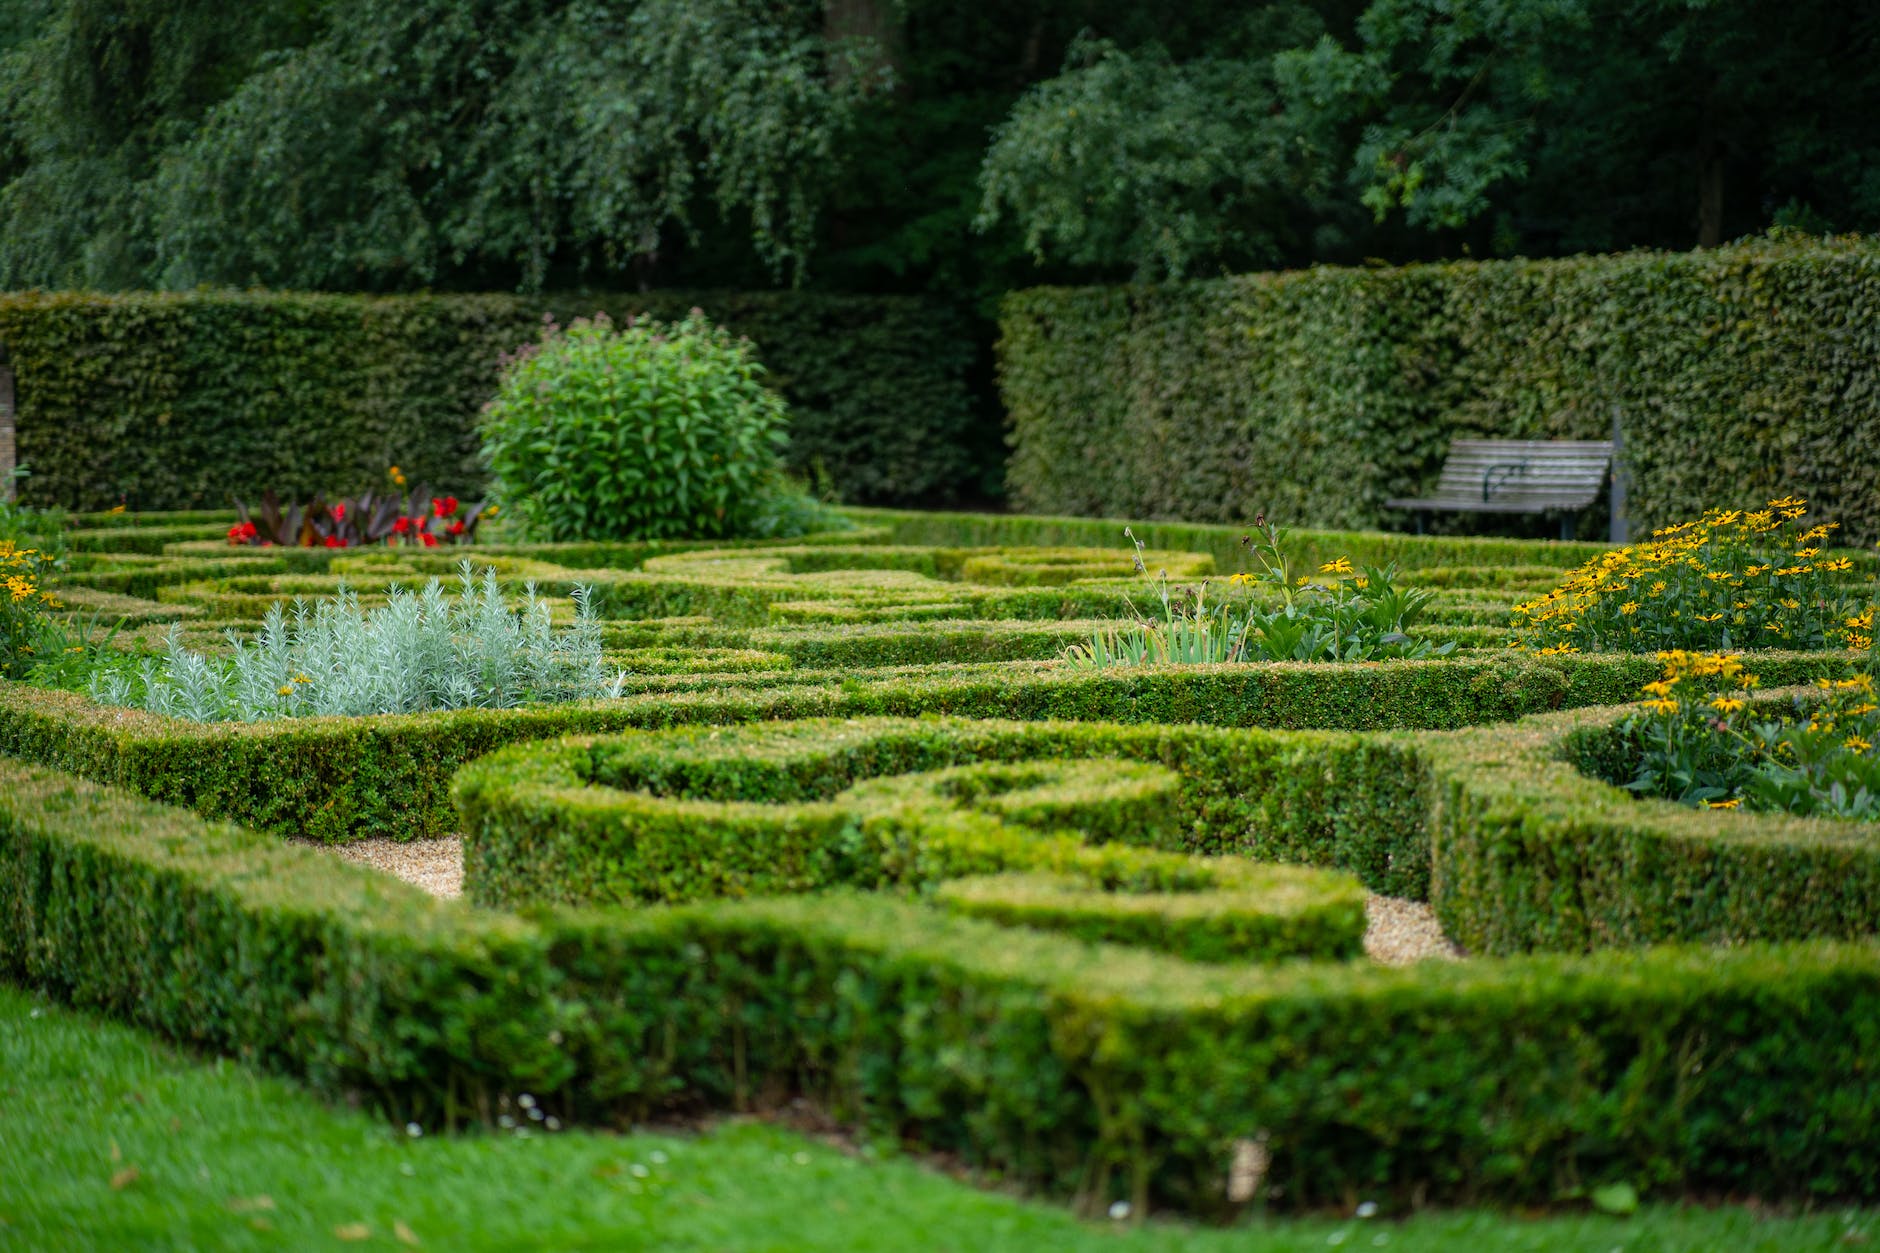 view of a hedge maze